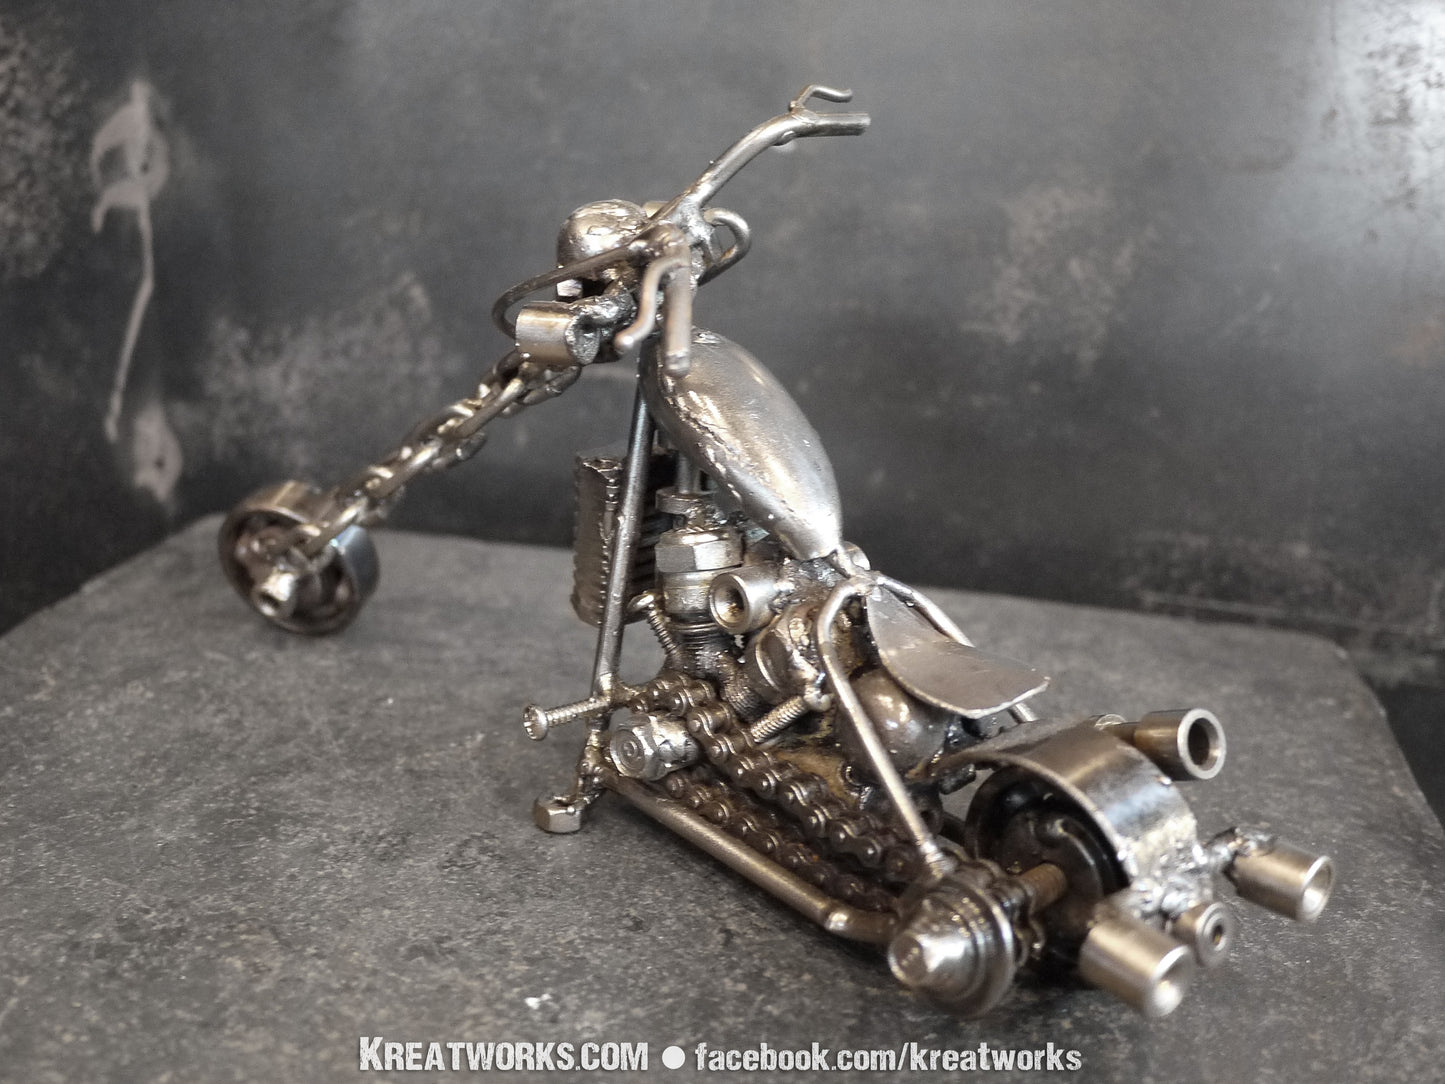 Skull Motorcycle (small item) / Recycle Metal Sustainable Sculpture Art